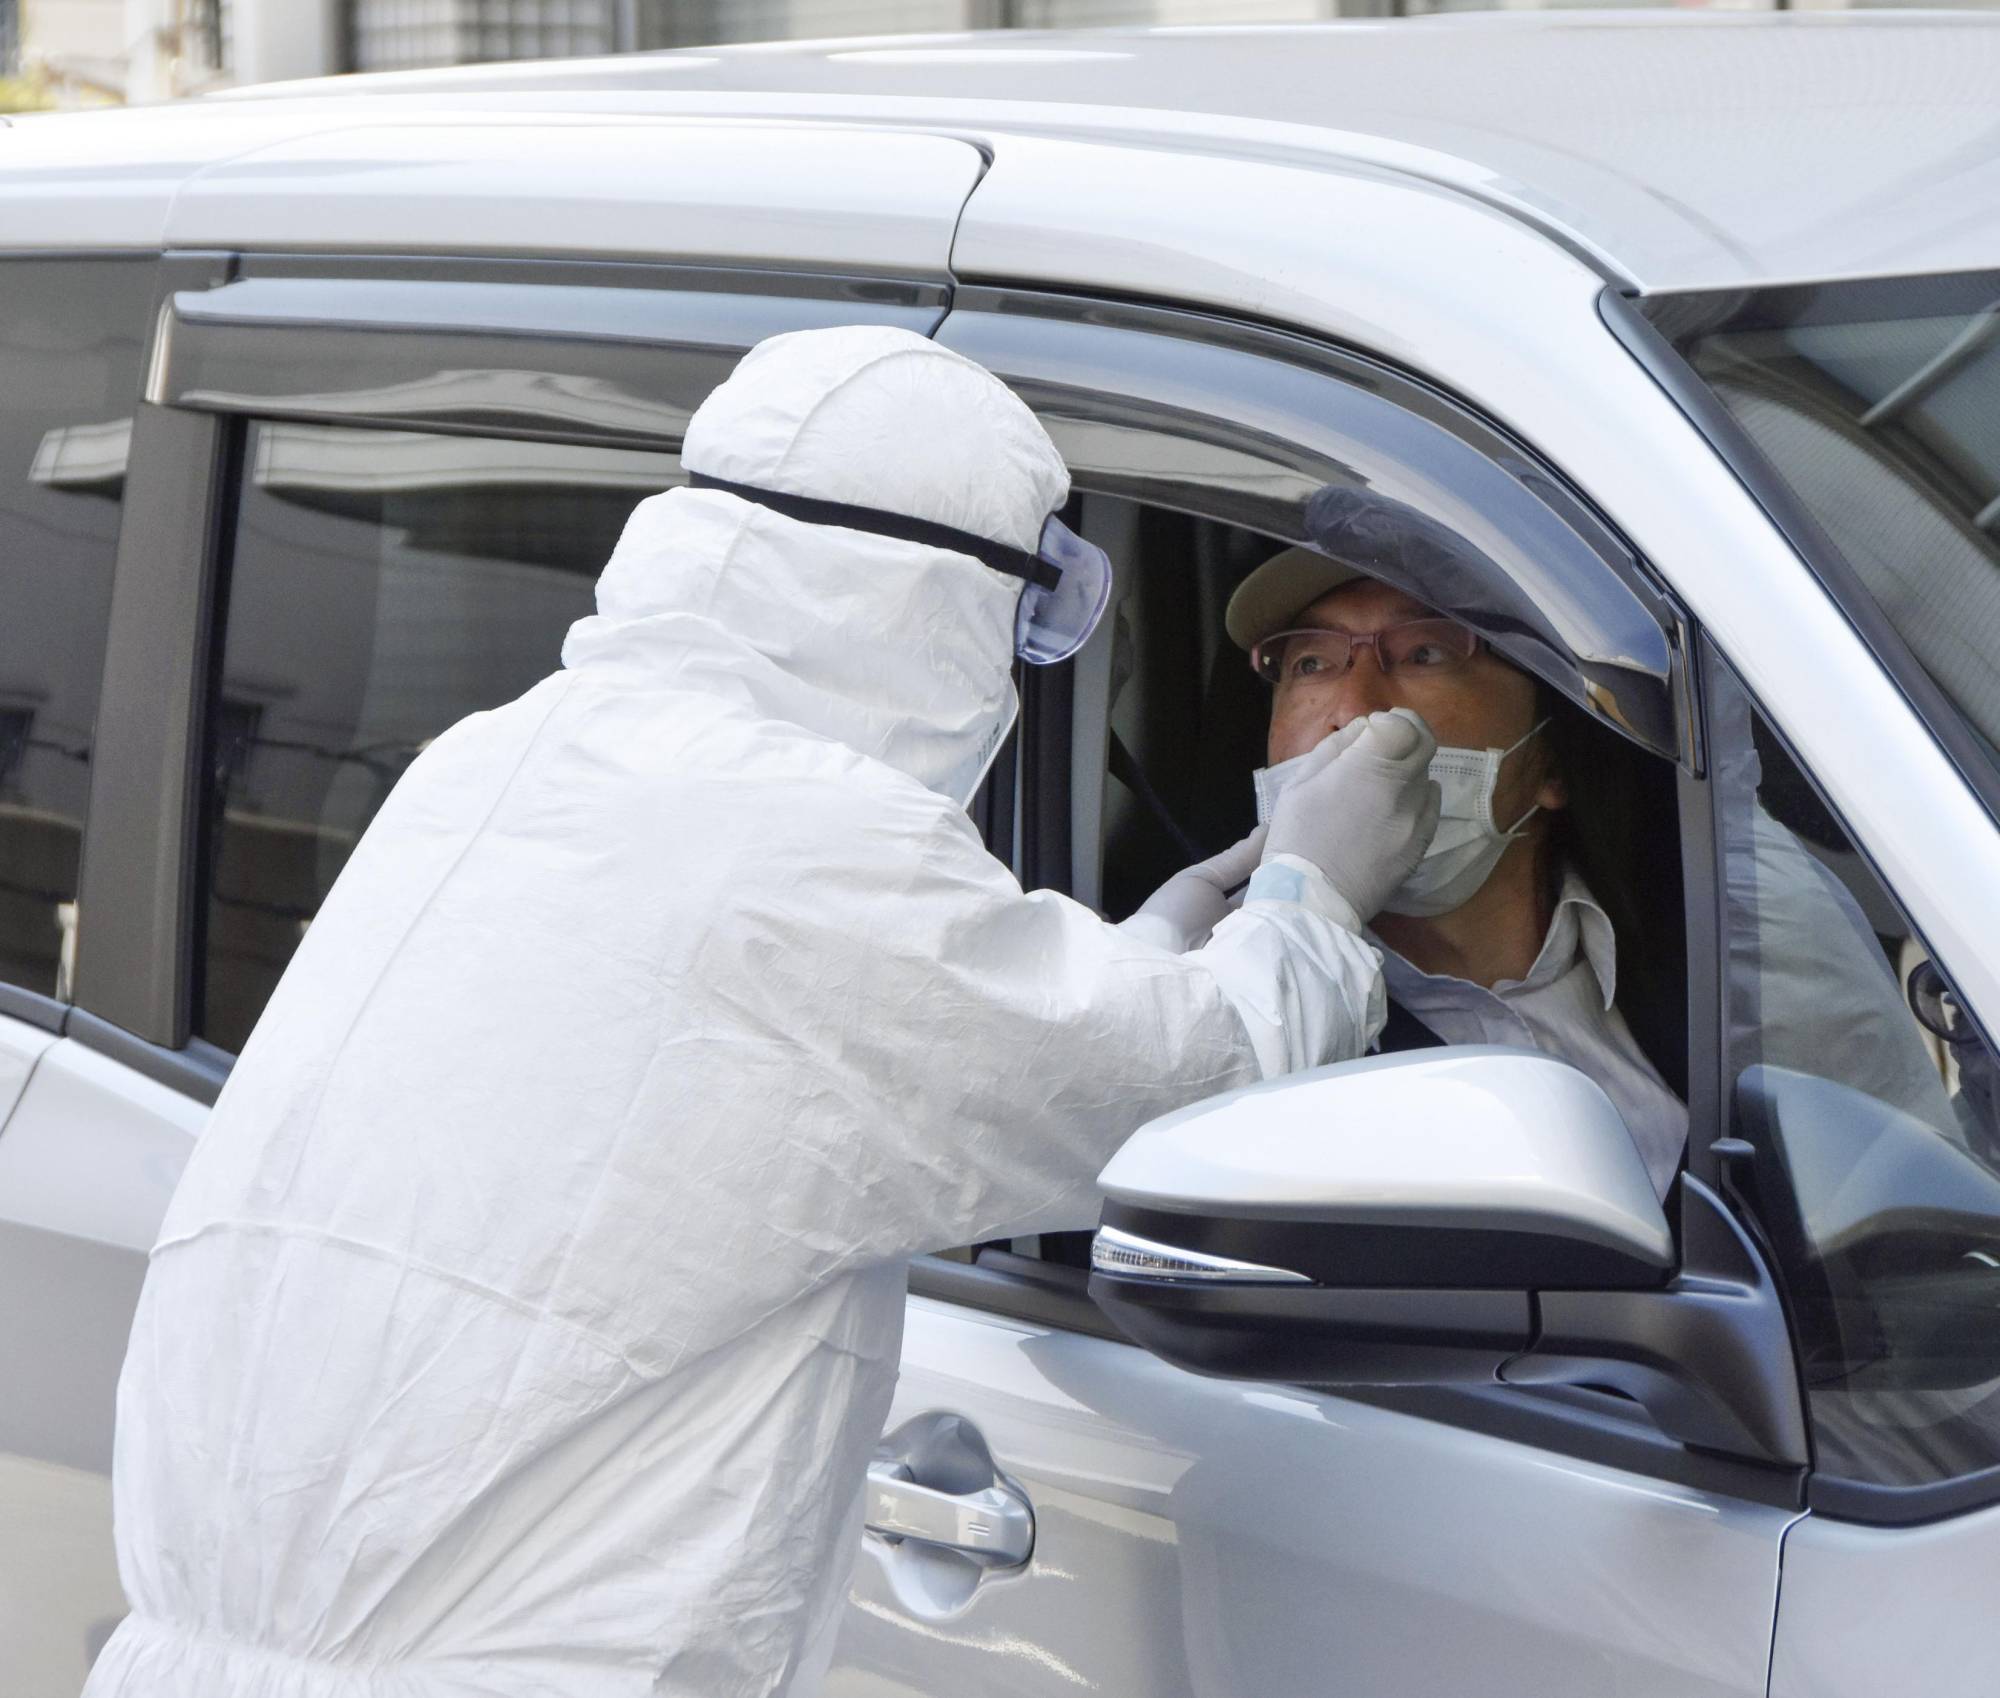 Drive-thru coronavirus testing is demonstrated in Osaka on Thursday. The Osaka Prefectural Government is looking to increase the number of tests it conducts to help contain the spread of the virus. | KYODO